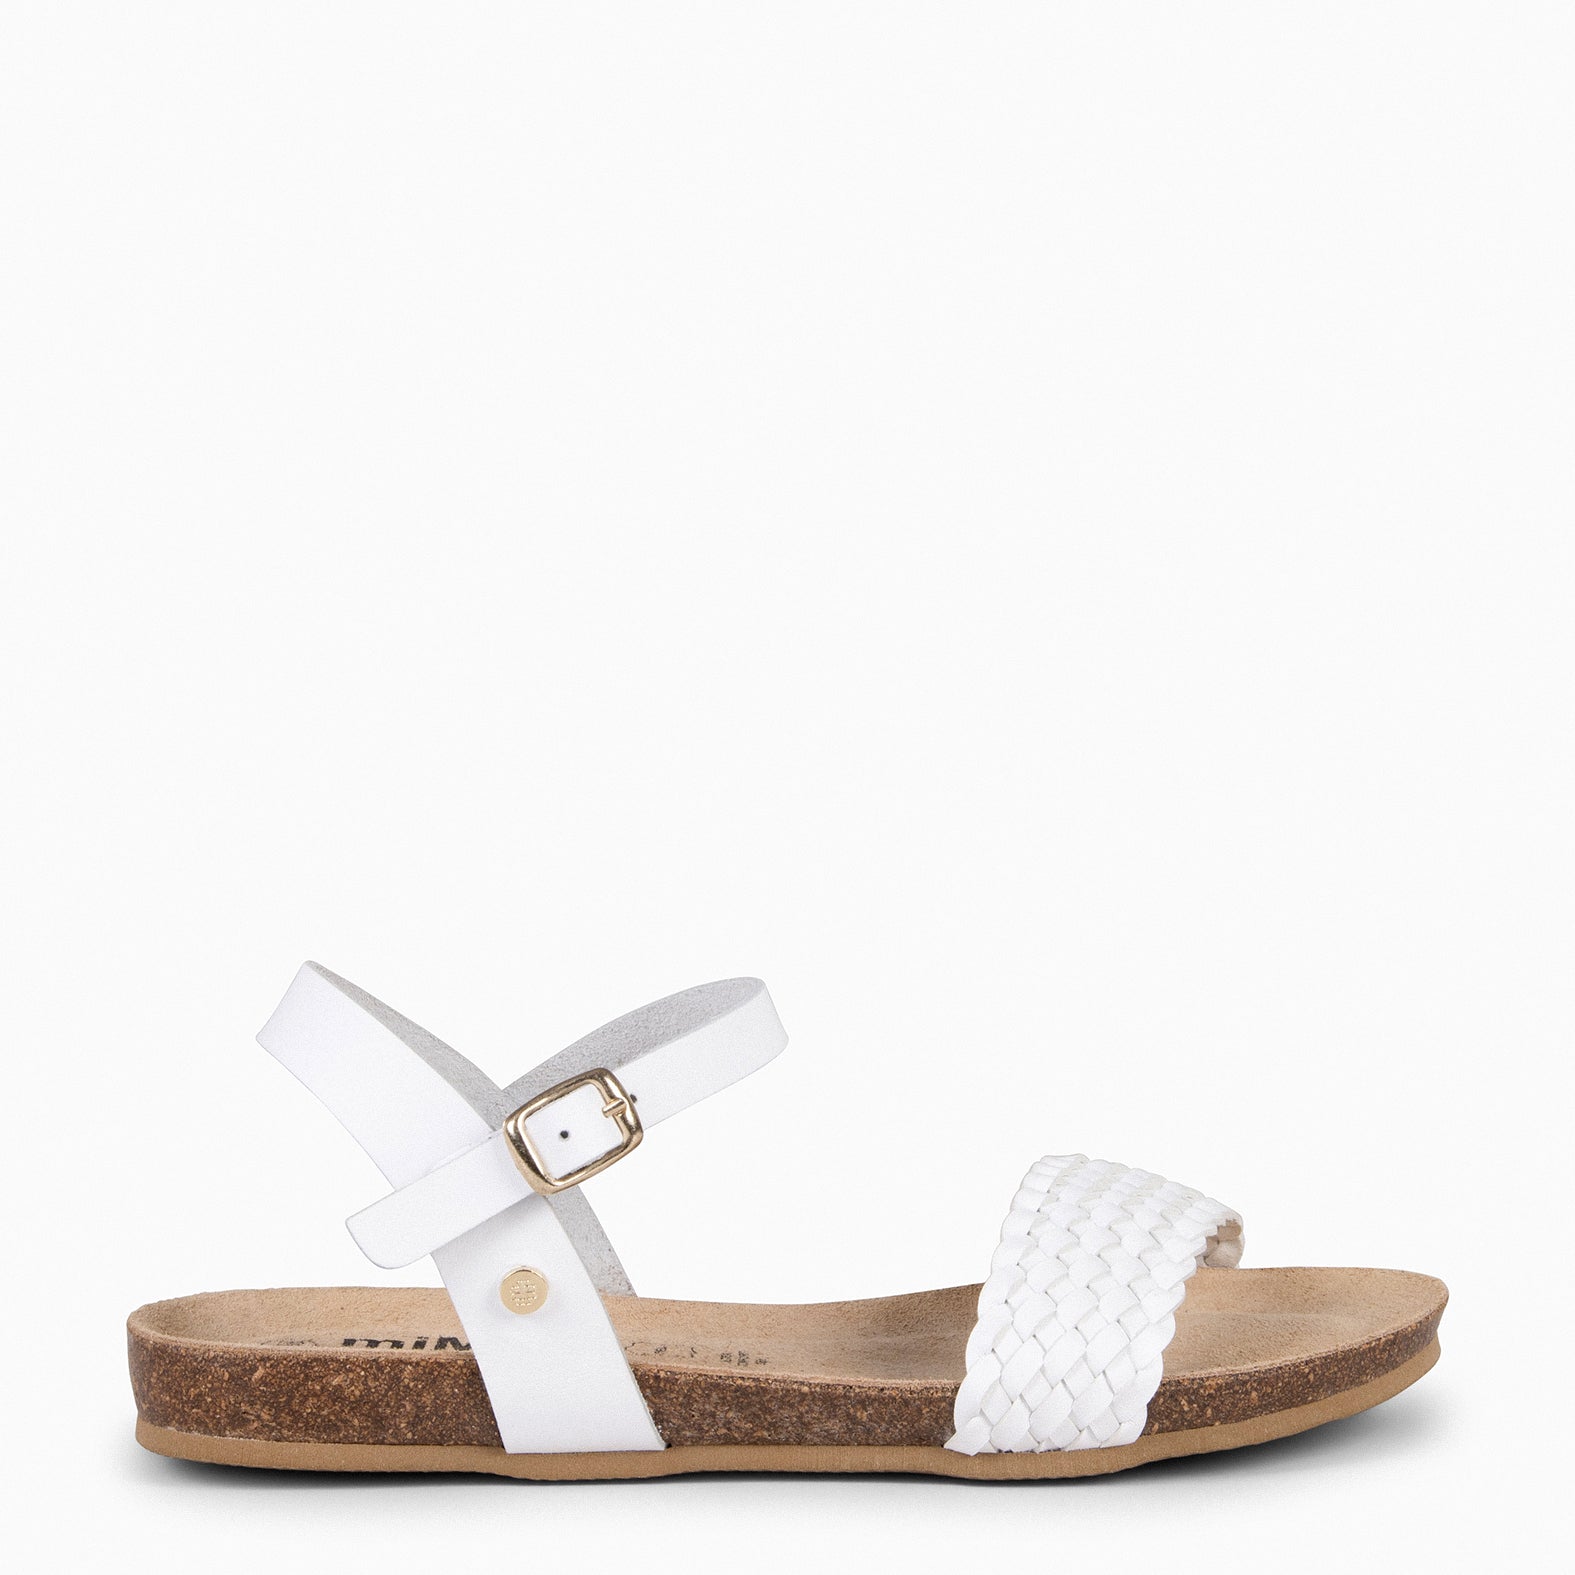 AIRE - WHITE BIO Flat Sandals with braided strap